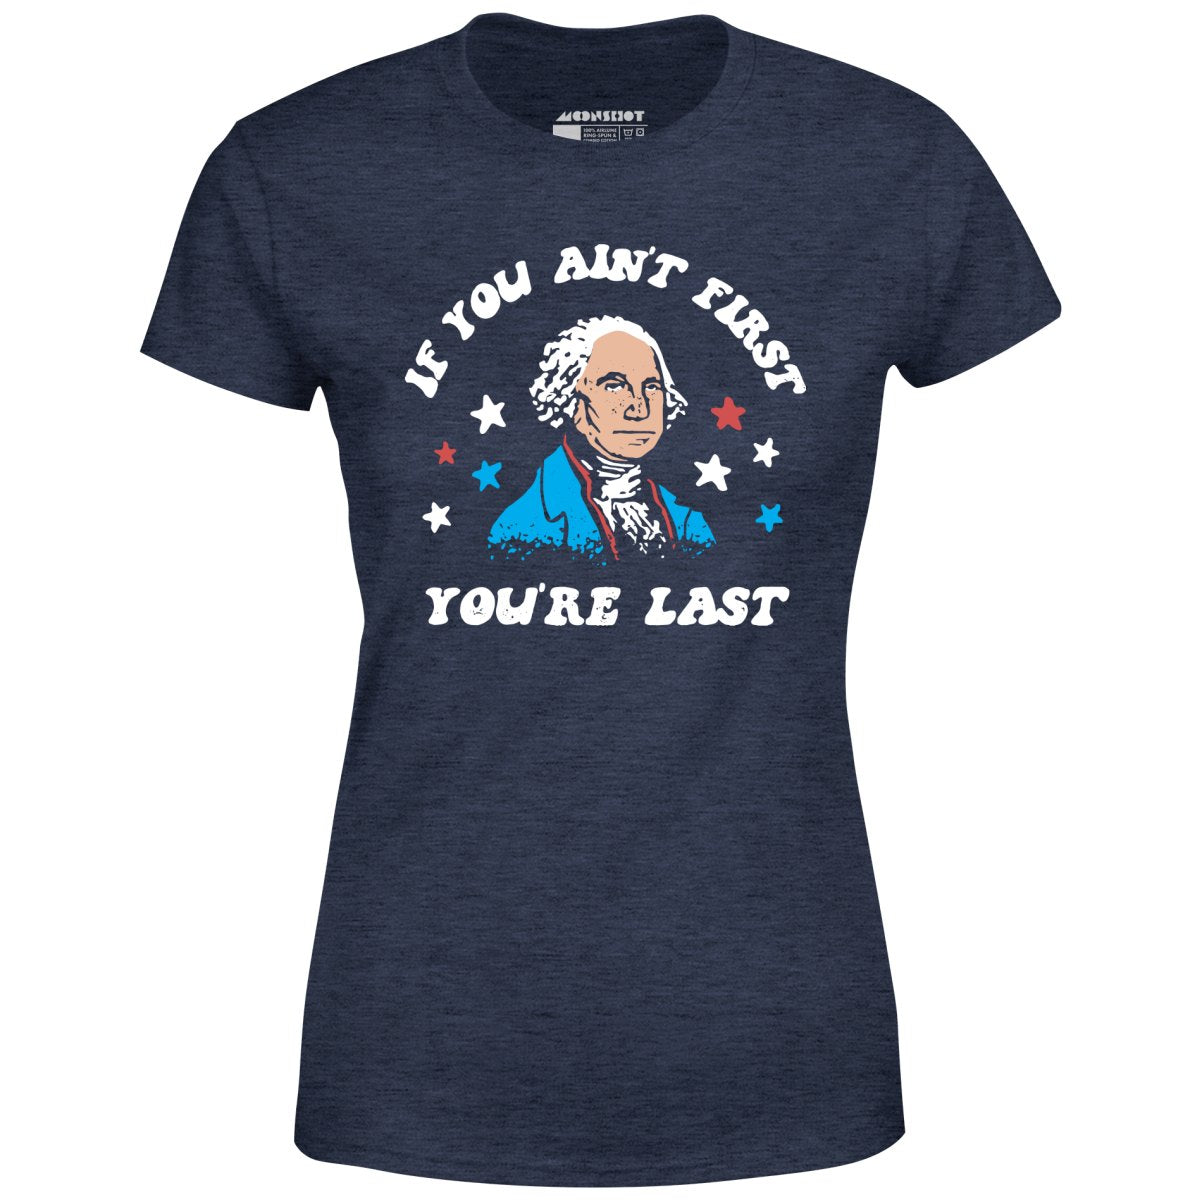 If You Ain't First You're Last - Women's T-Shirt